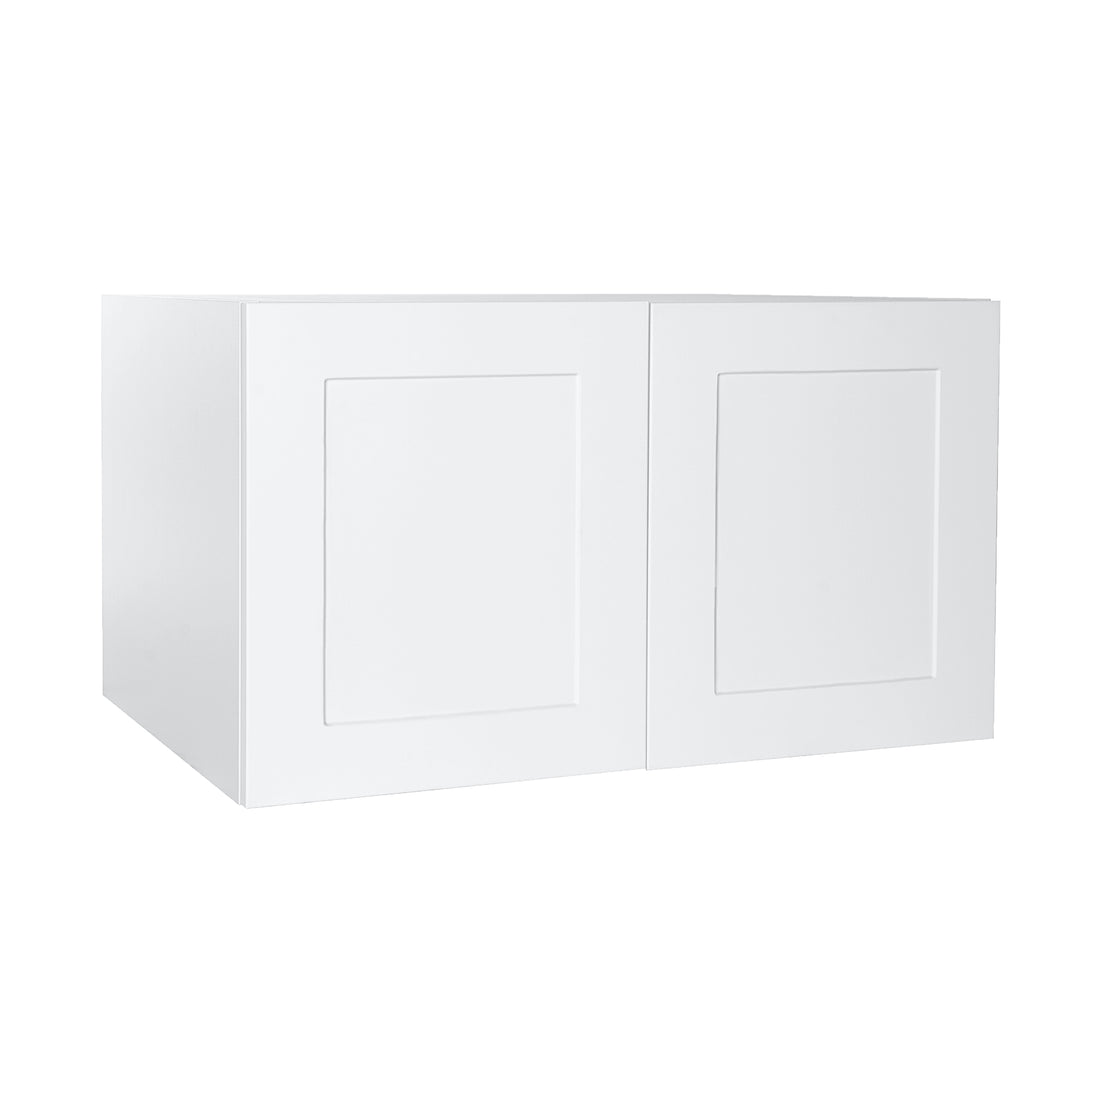 Quick Assemble Modern Style With Soft Close, Shaker Wall Bridge Kitchen Cabinet (30 in W x 18 in H x 24 in D) -  Pro-Edge HD